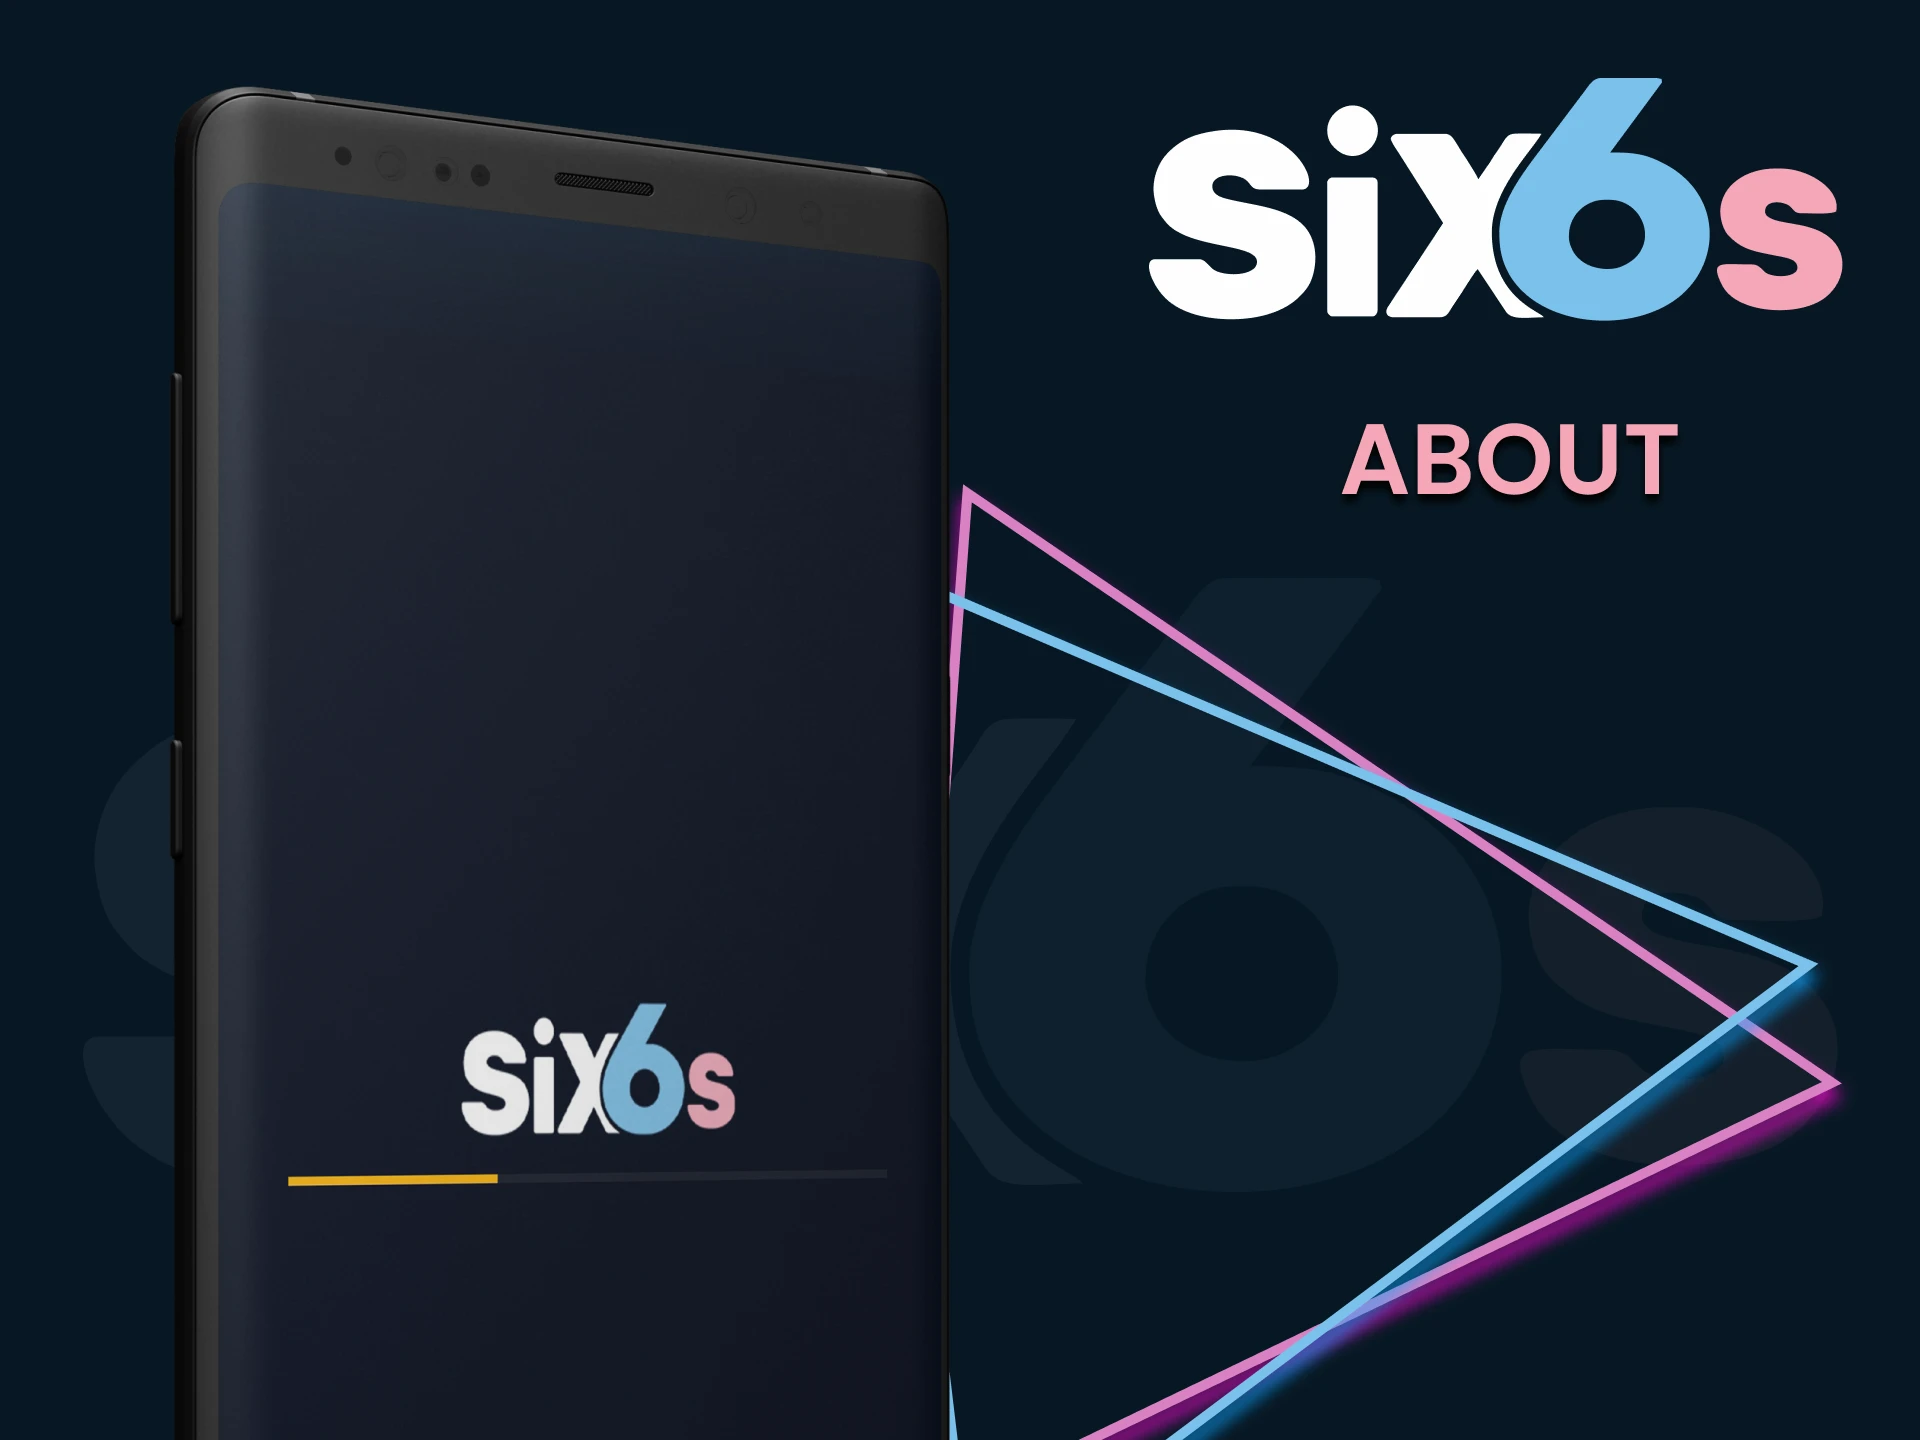 We will provide all the necessary information about the Six6s service.